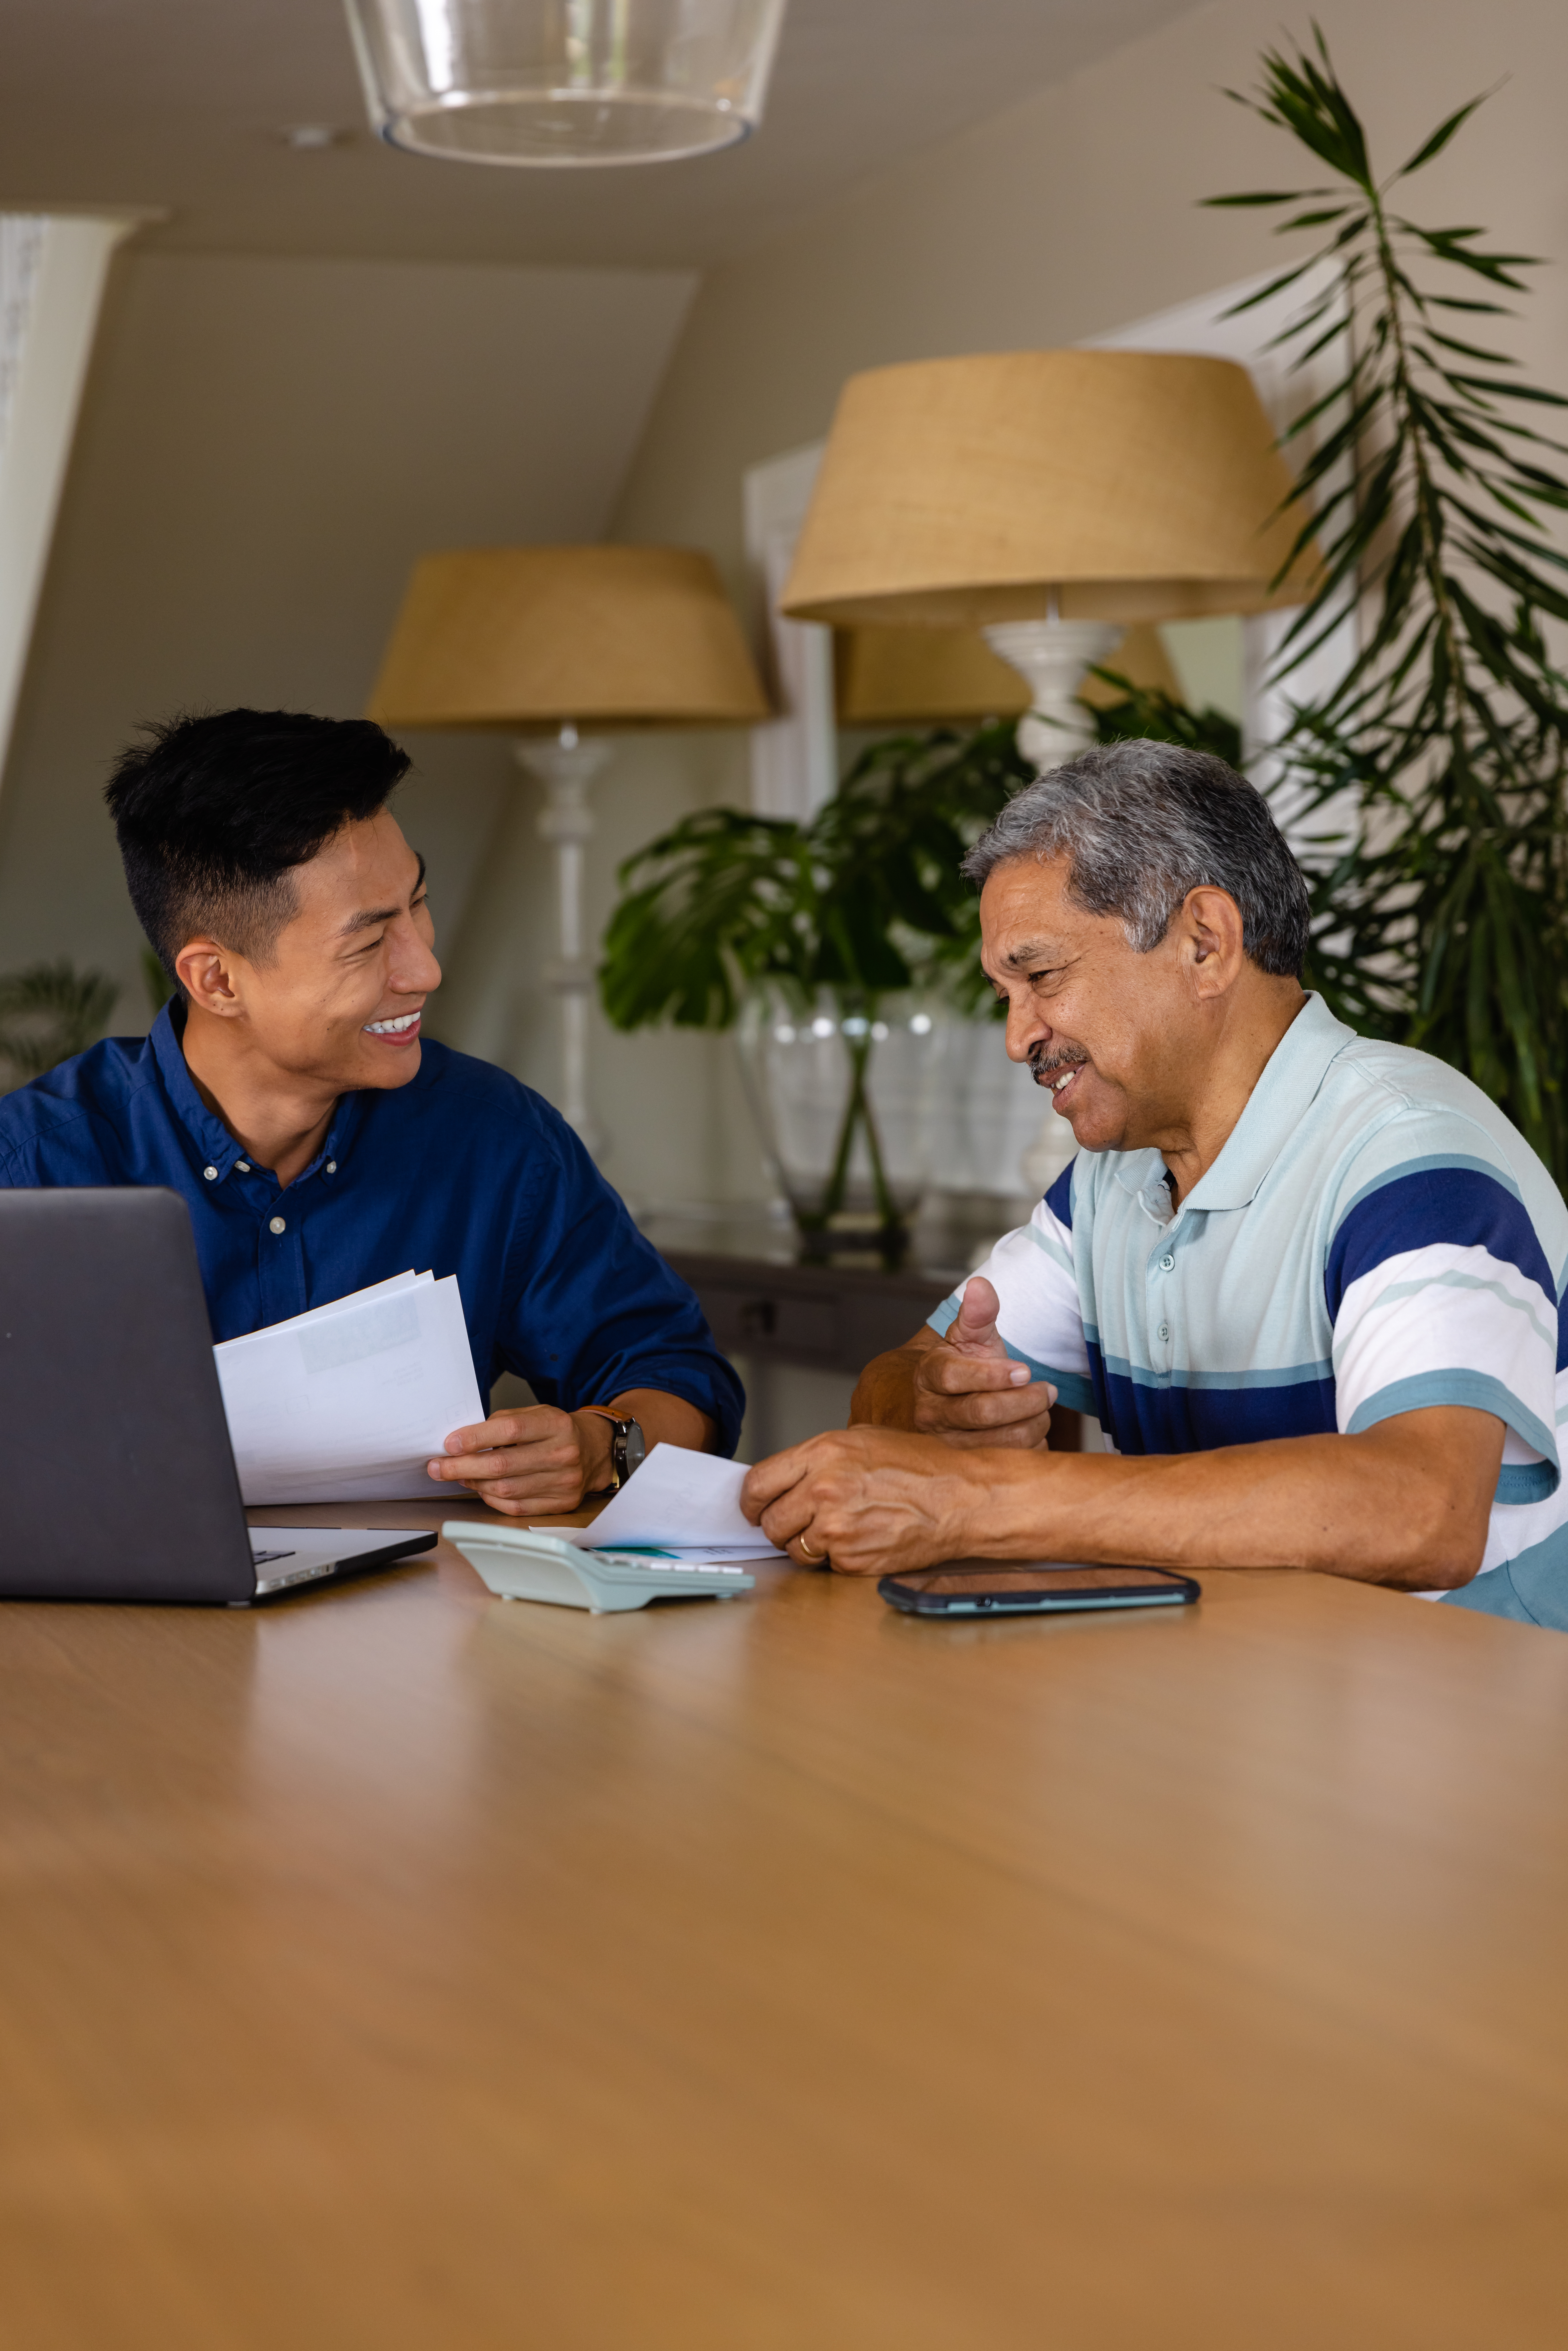 Happy diverse financial advisor and senior man discussing paperwork and using laptop in dining room. Finance, retirement, domestic life, communication and senior lifestyle, unaltered.